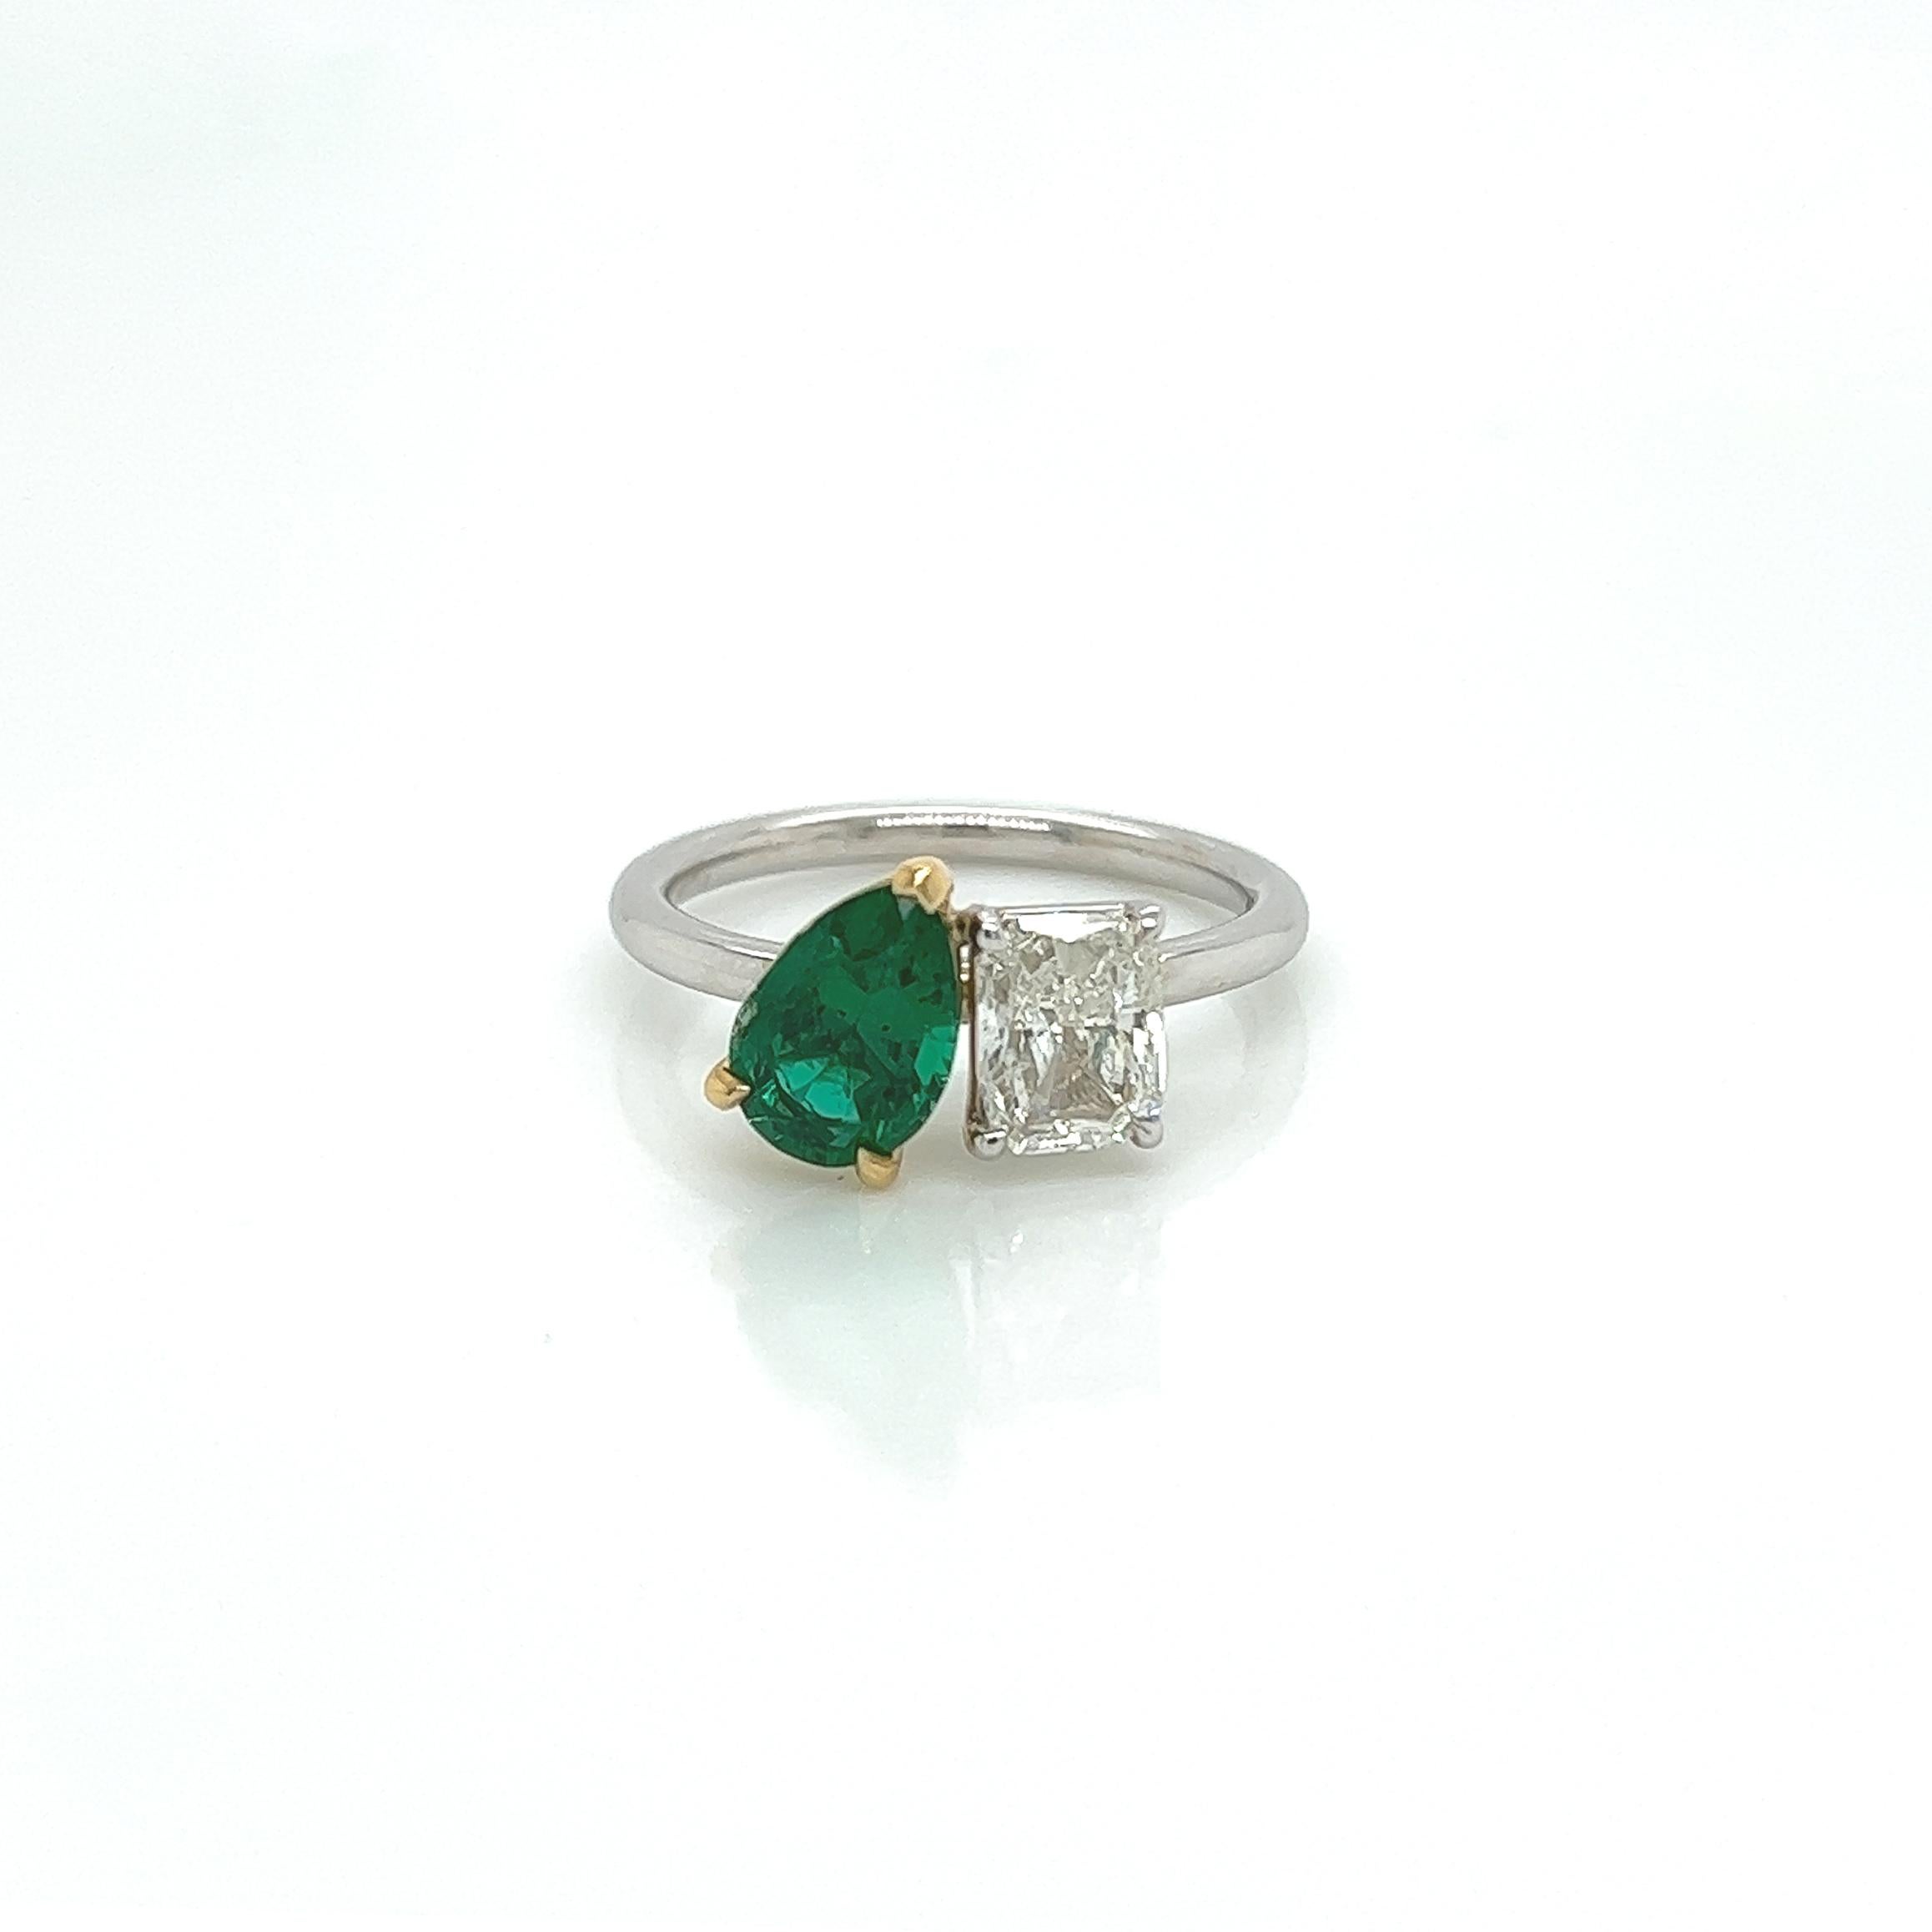 2.18 Total Carat Two-Stone Emerald and Diamond Ladies Ring in 18K White Gold, GIA Certified

This two-stone ring is a truly splendid piece of jewelry. Featuring an elegant 1.18 Carat Pear cut green emerald nestled beside a 1 Carat Radiant cut